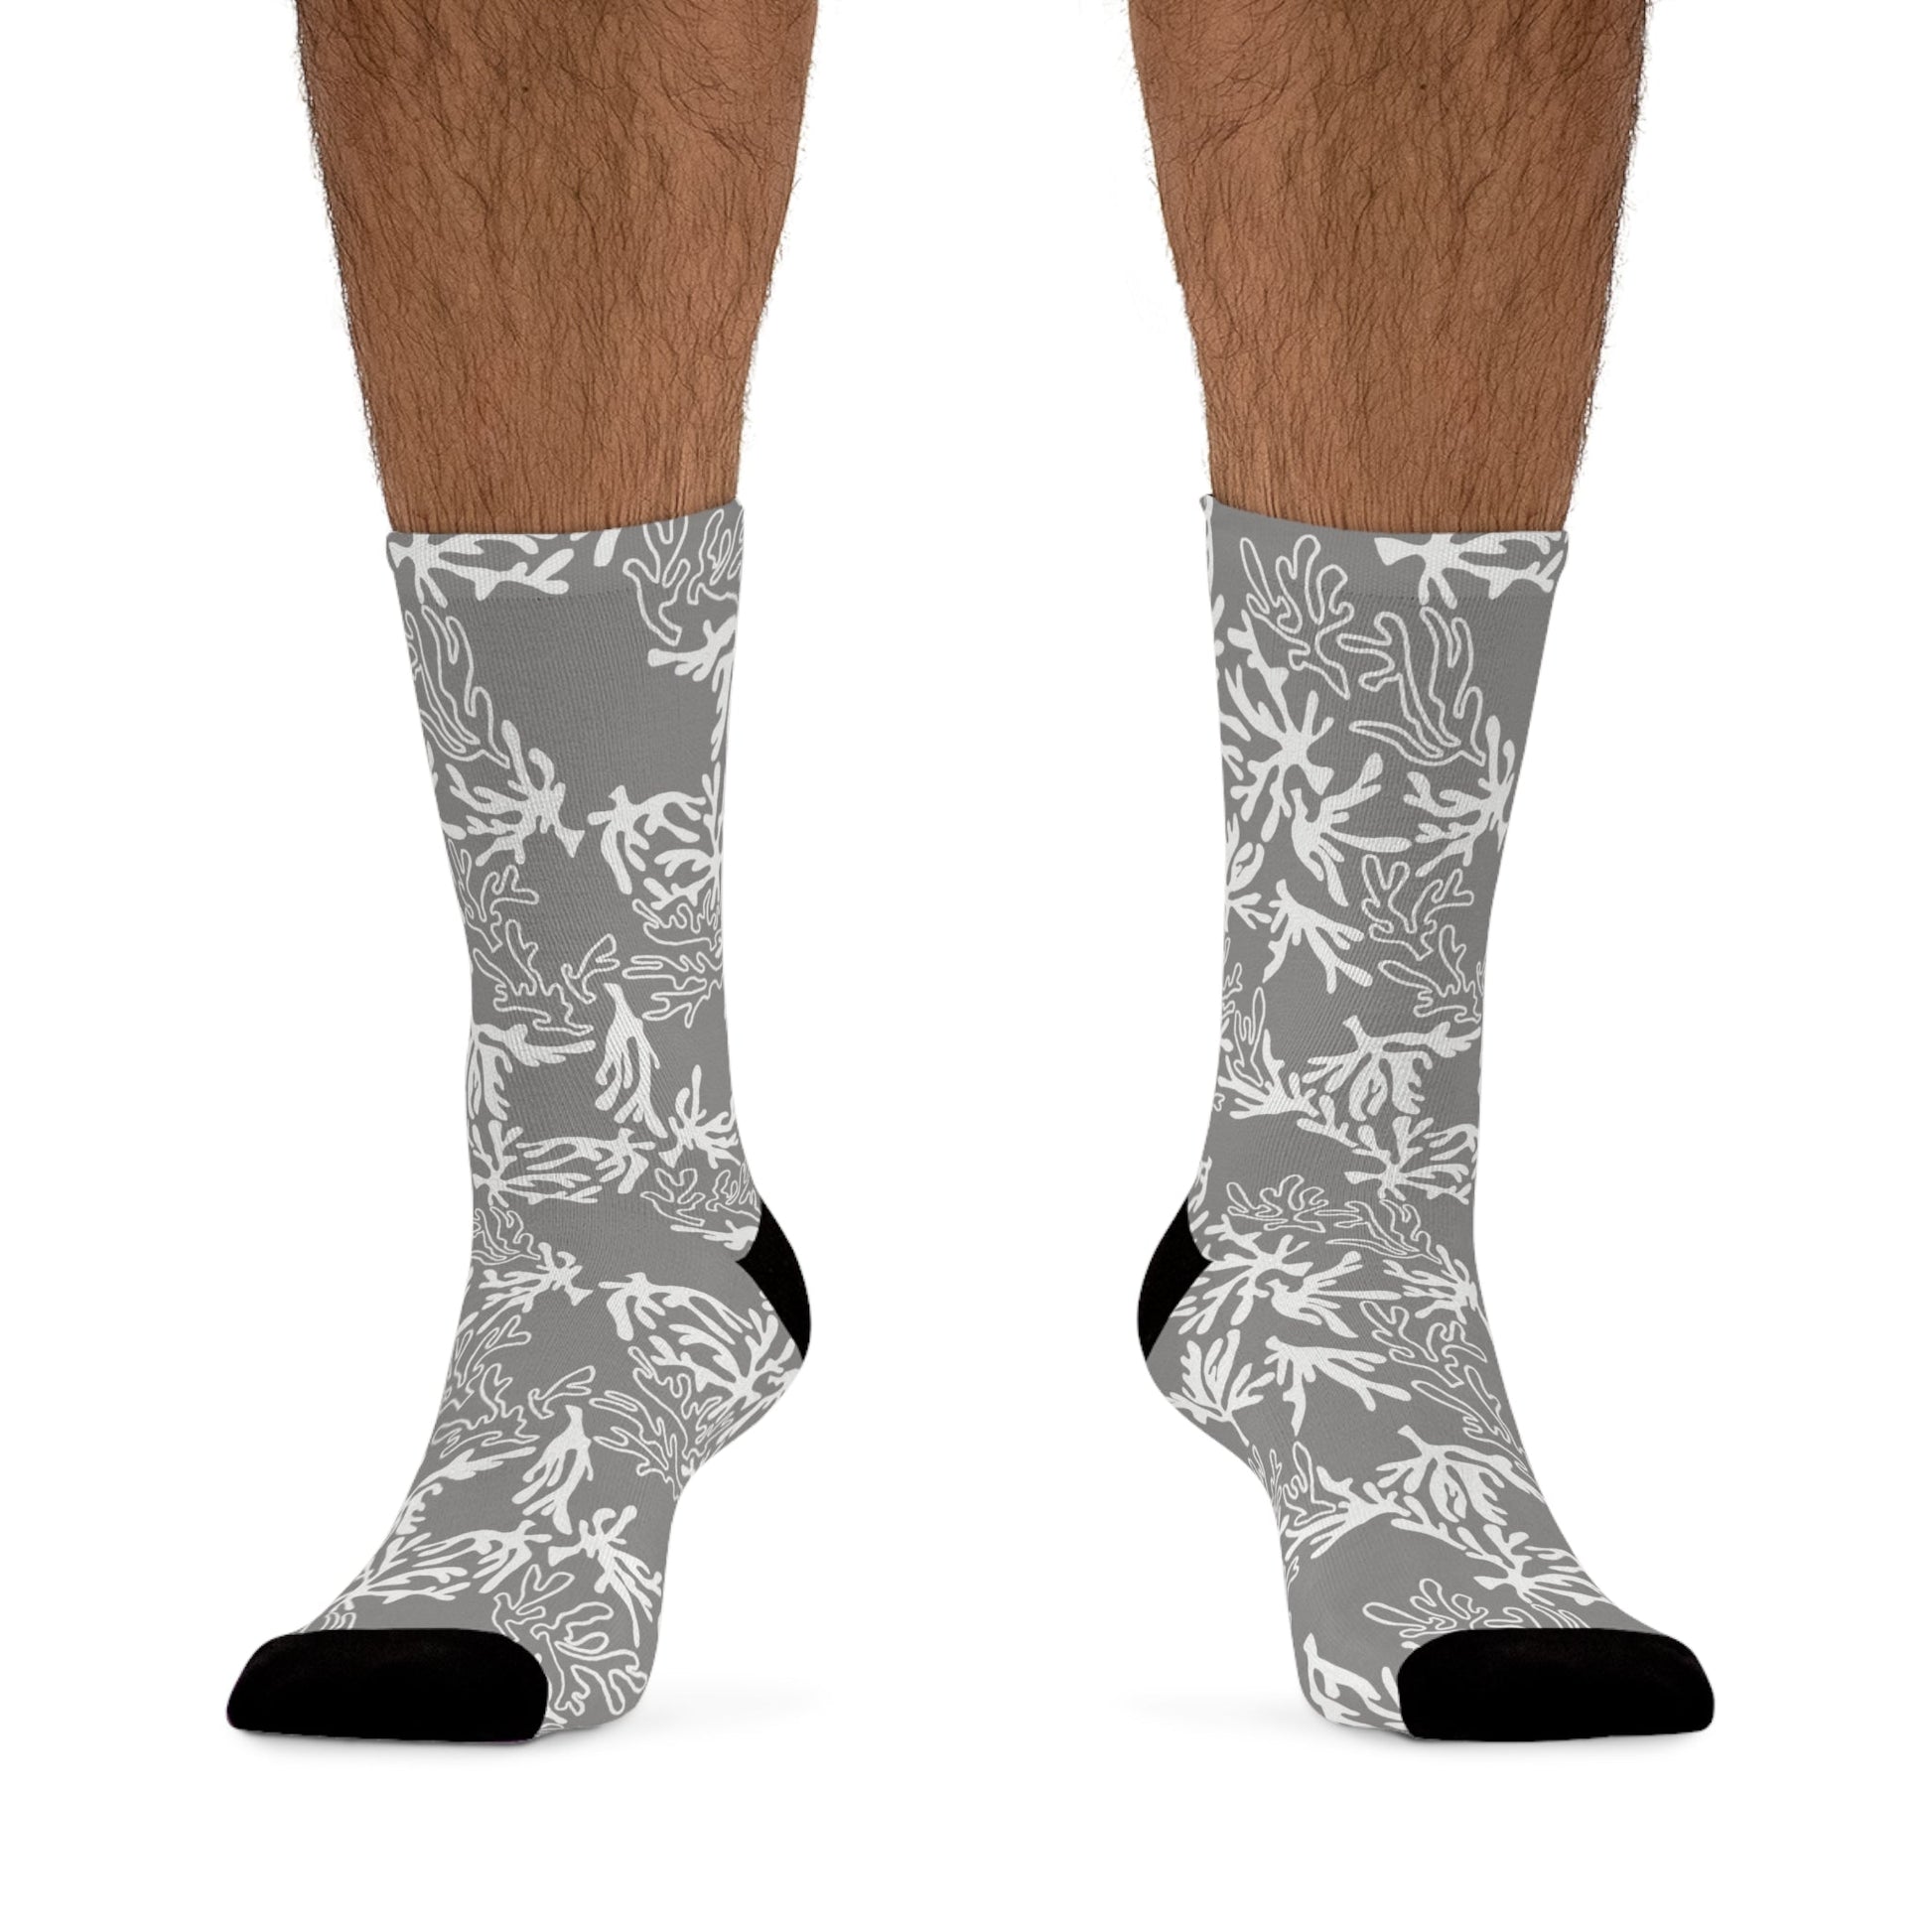 Recycled Poly Socks Coral Sharkskin Grey - Global Village Kailua Boutique